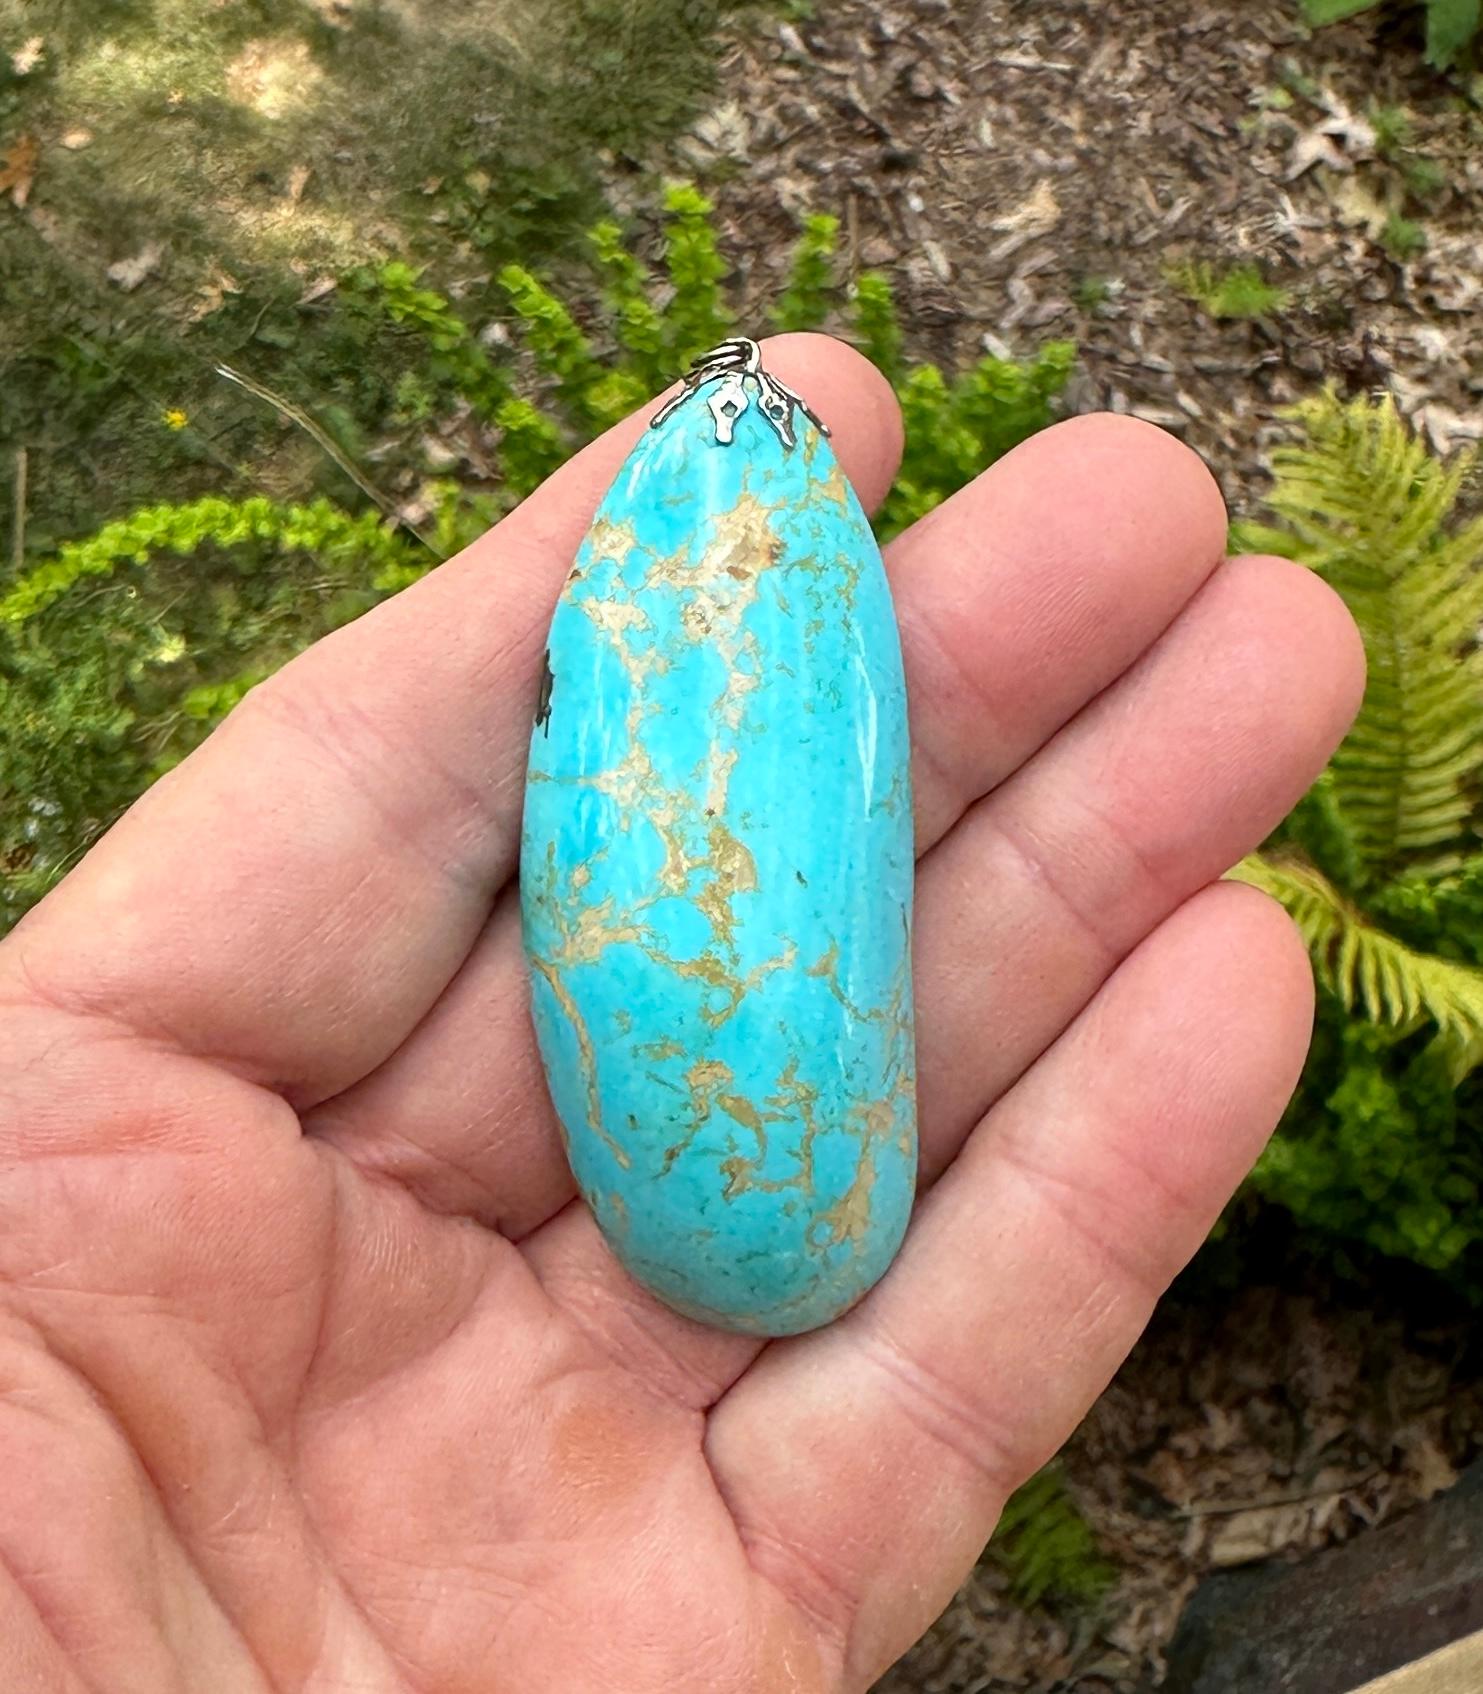 This is a stunning monumental Turquoise pendant set in Silver.  The natural mined Turquoise is 2 7/8 inches in length and is 1 1/4 inches wide.  The turquoise has gorgeous blue color with fabulous matrix.  It is polished to a smooth surface which is